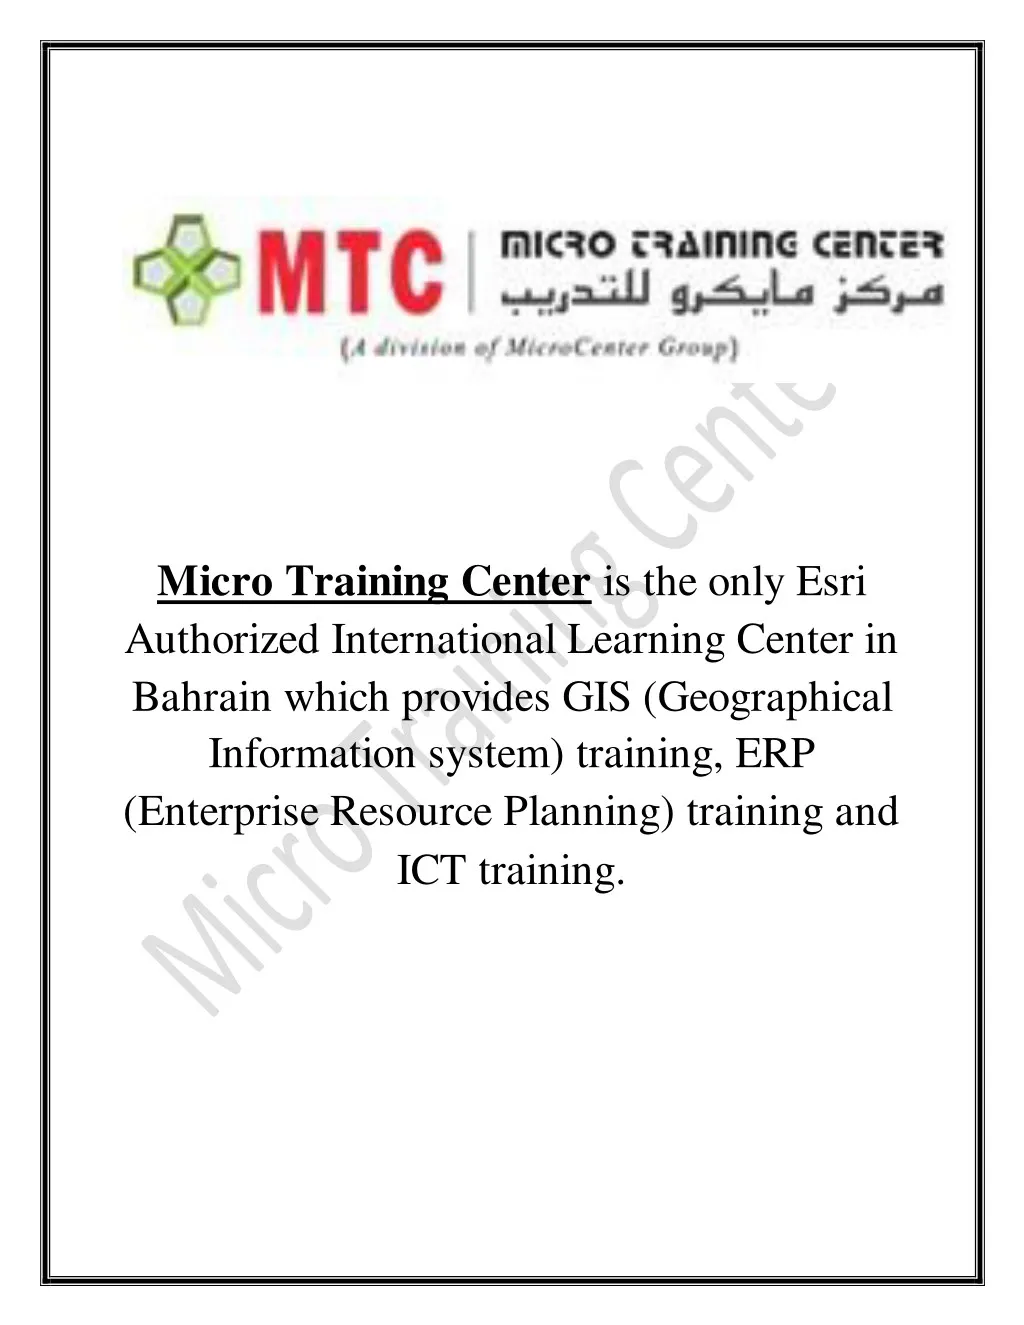 micro training center is the only esri authorized